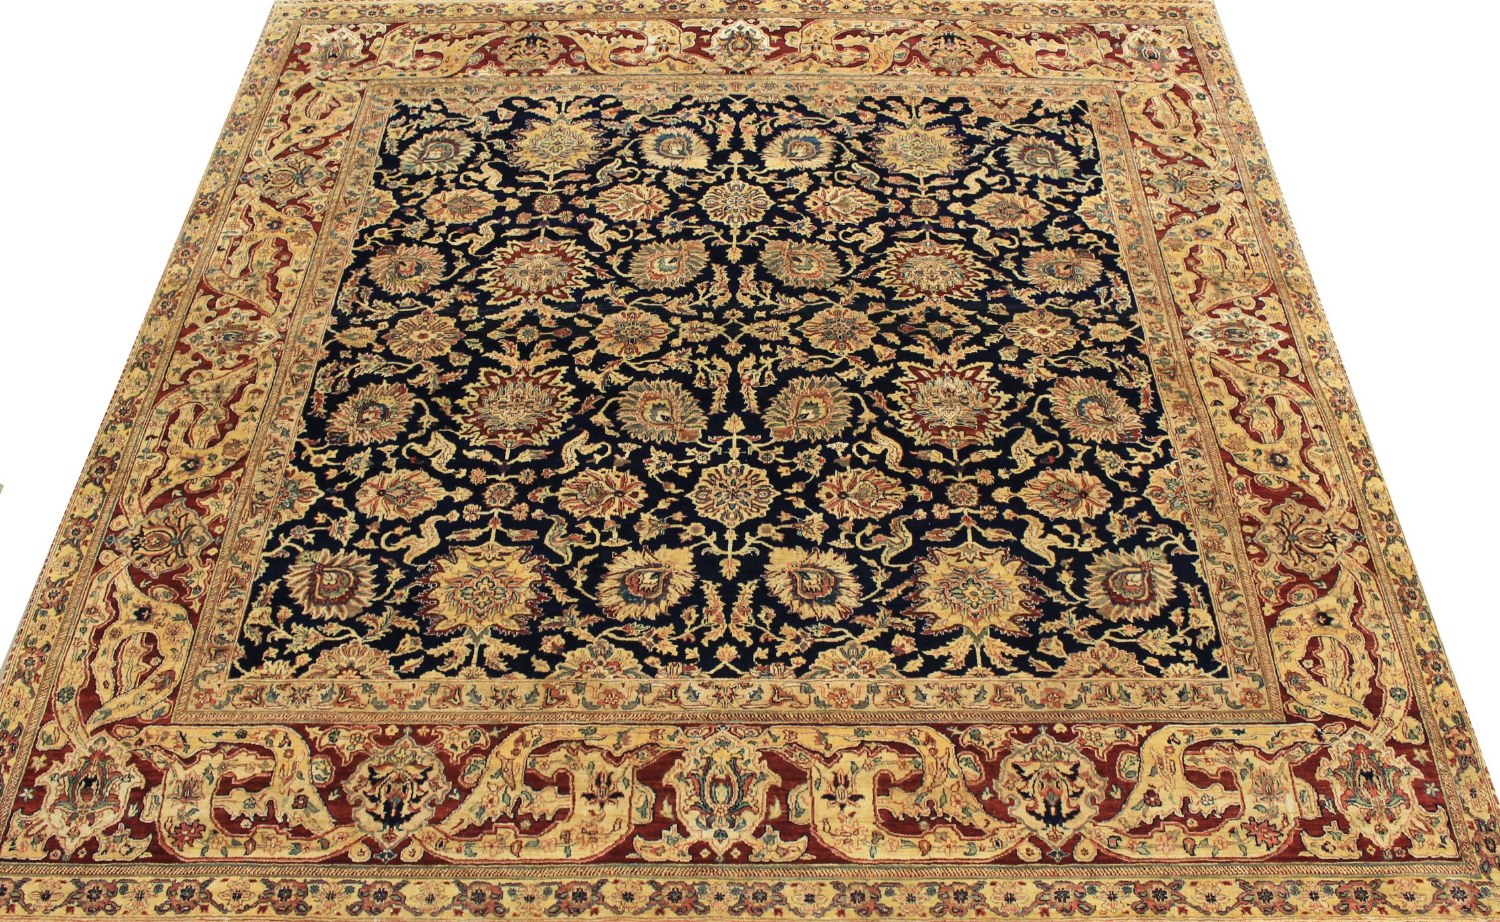 9 ft. & Over Round & Square Traditional Hand Knotted Wool Area Rug - MR024516